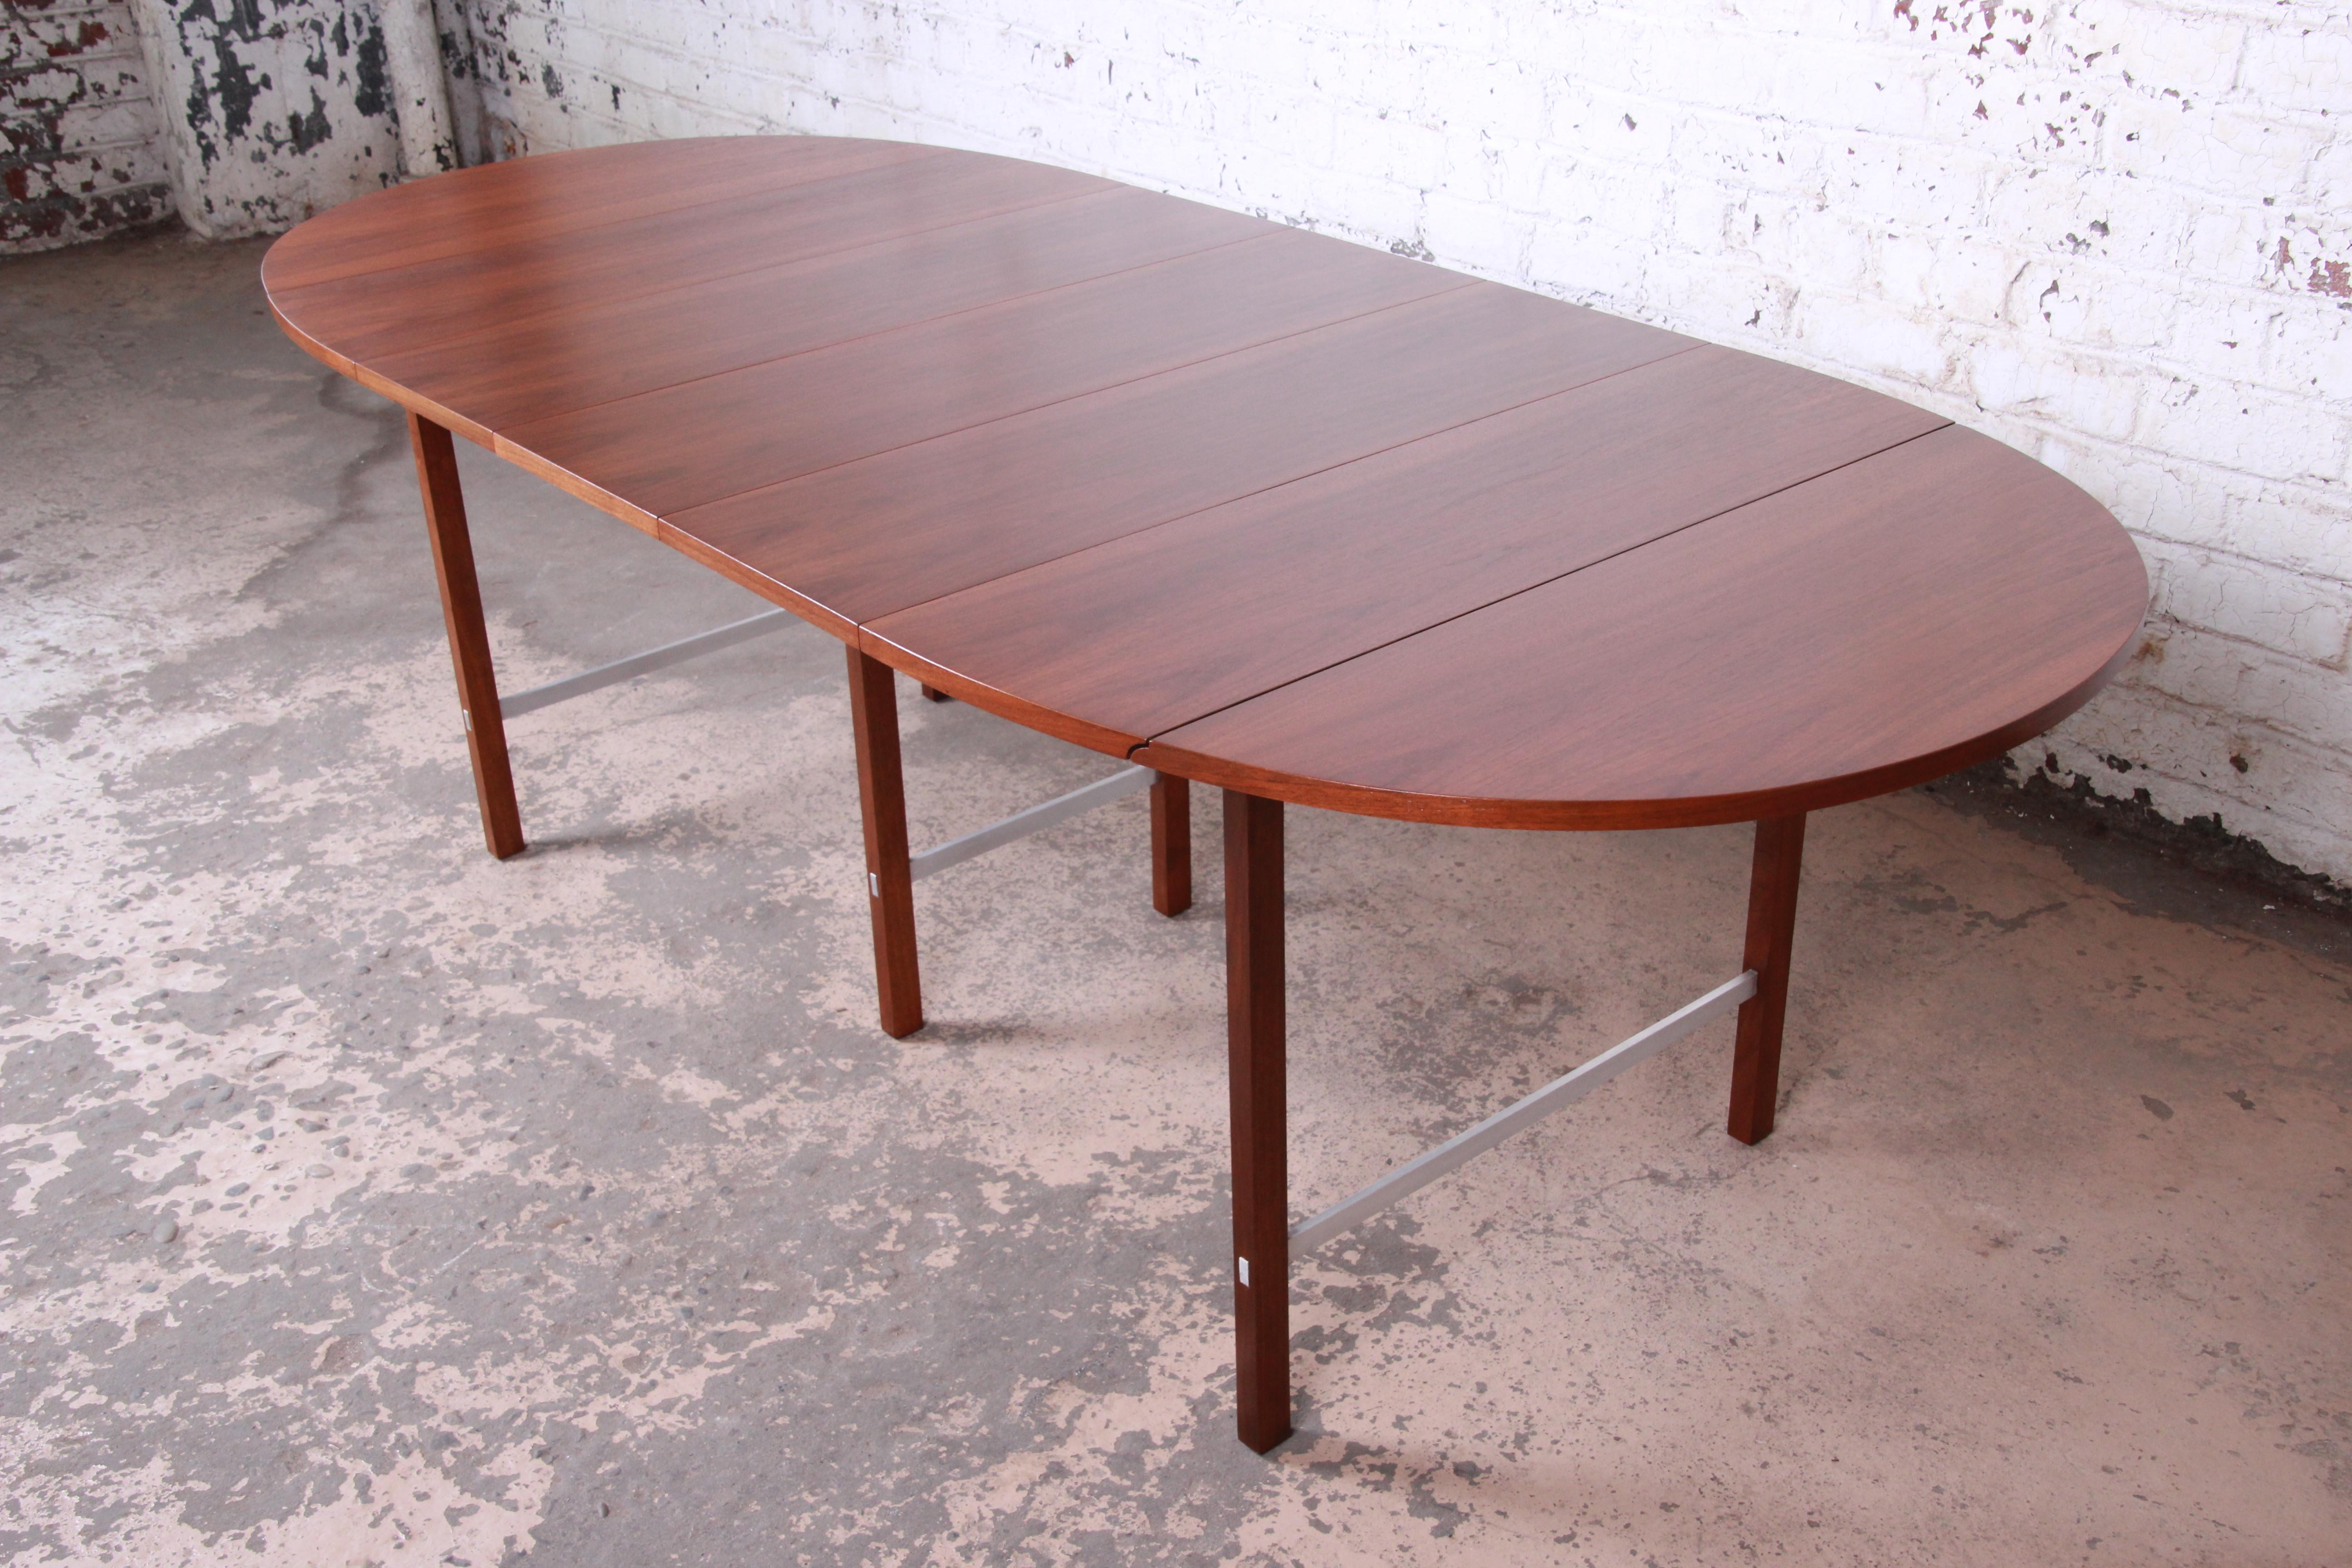 An exceptional Mid-Century Modern walnut extension drop-leaf dining table designed by Paul McCobb for Calvin Furniture. The table features stunning walnut wood grain and aluminum stretchers. It has clean midcentury lines--an excellent example of